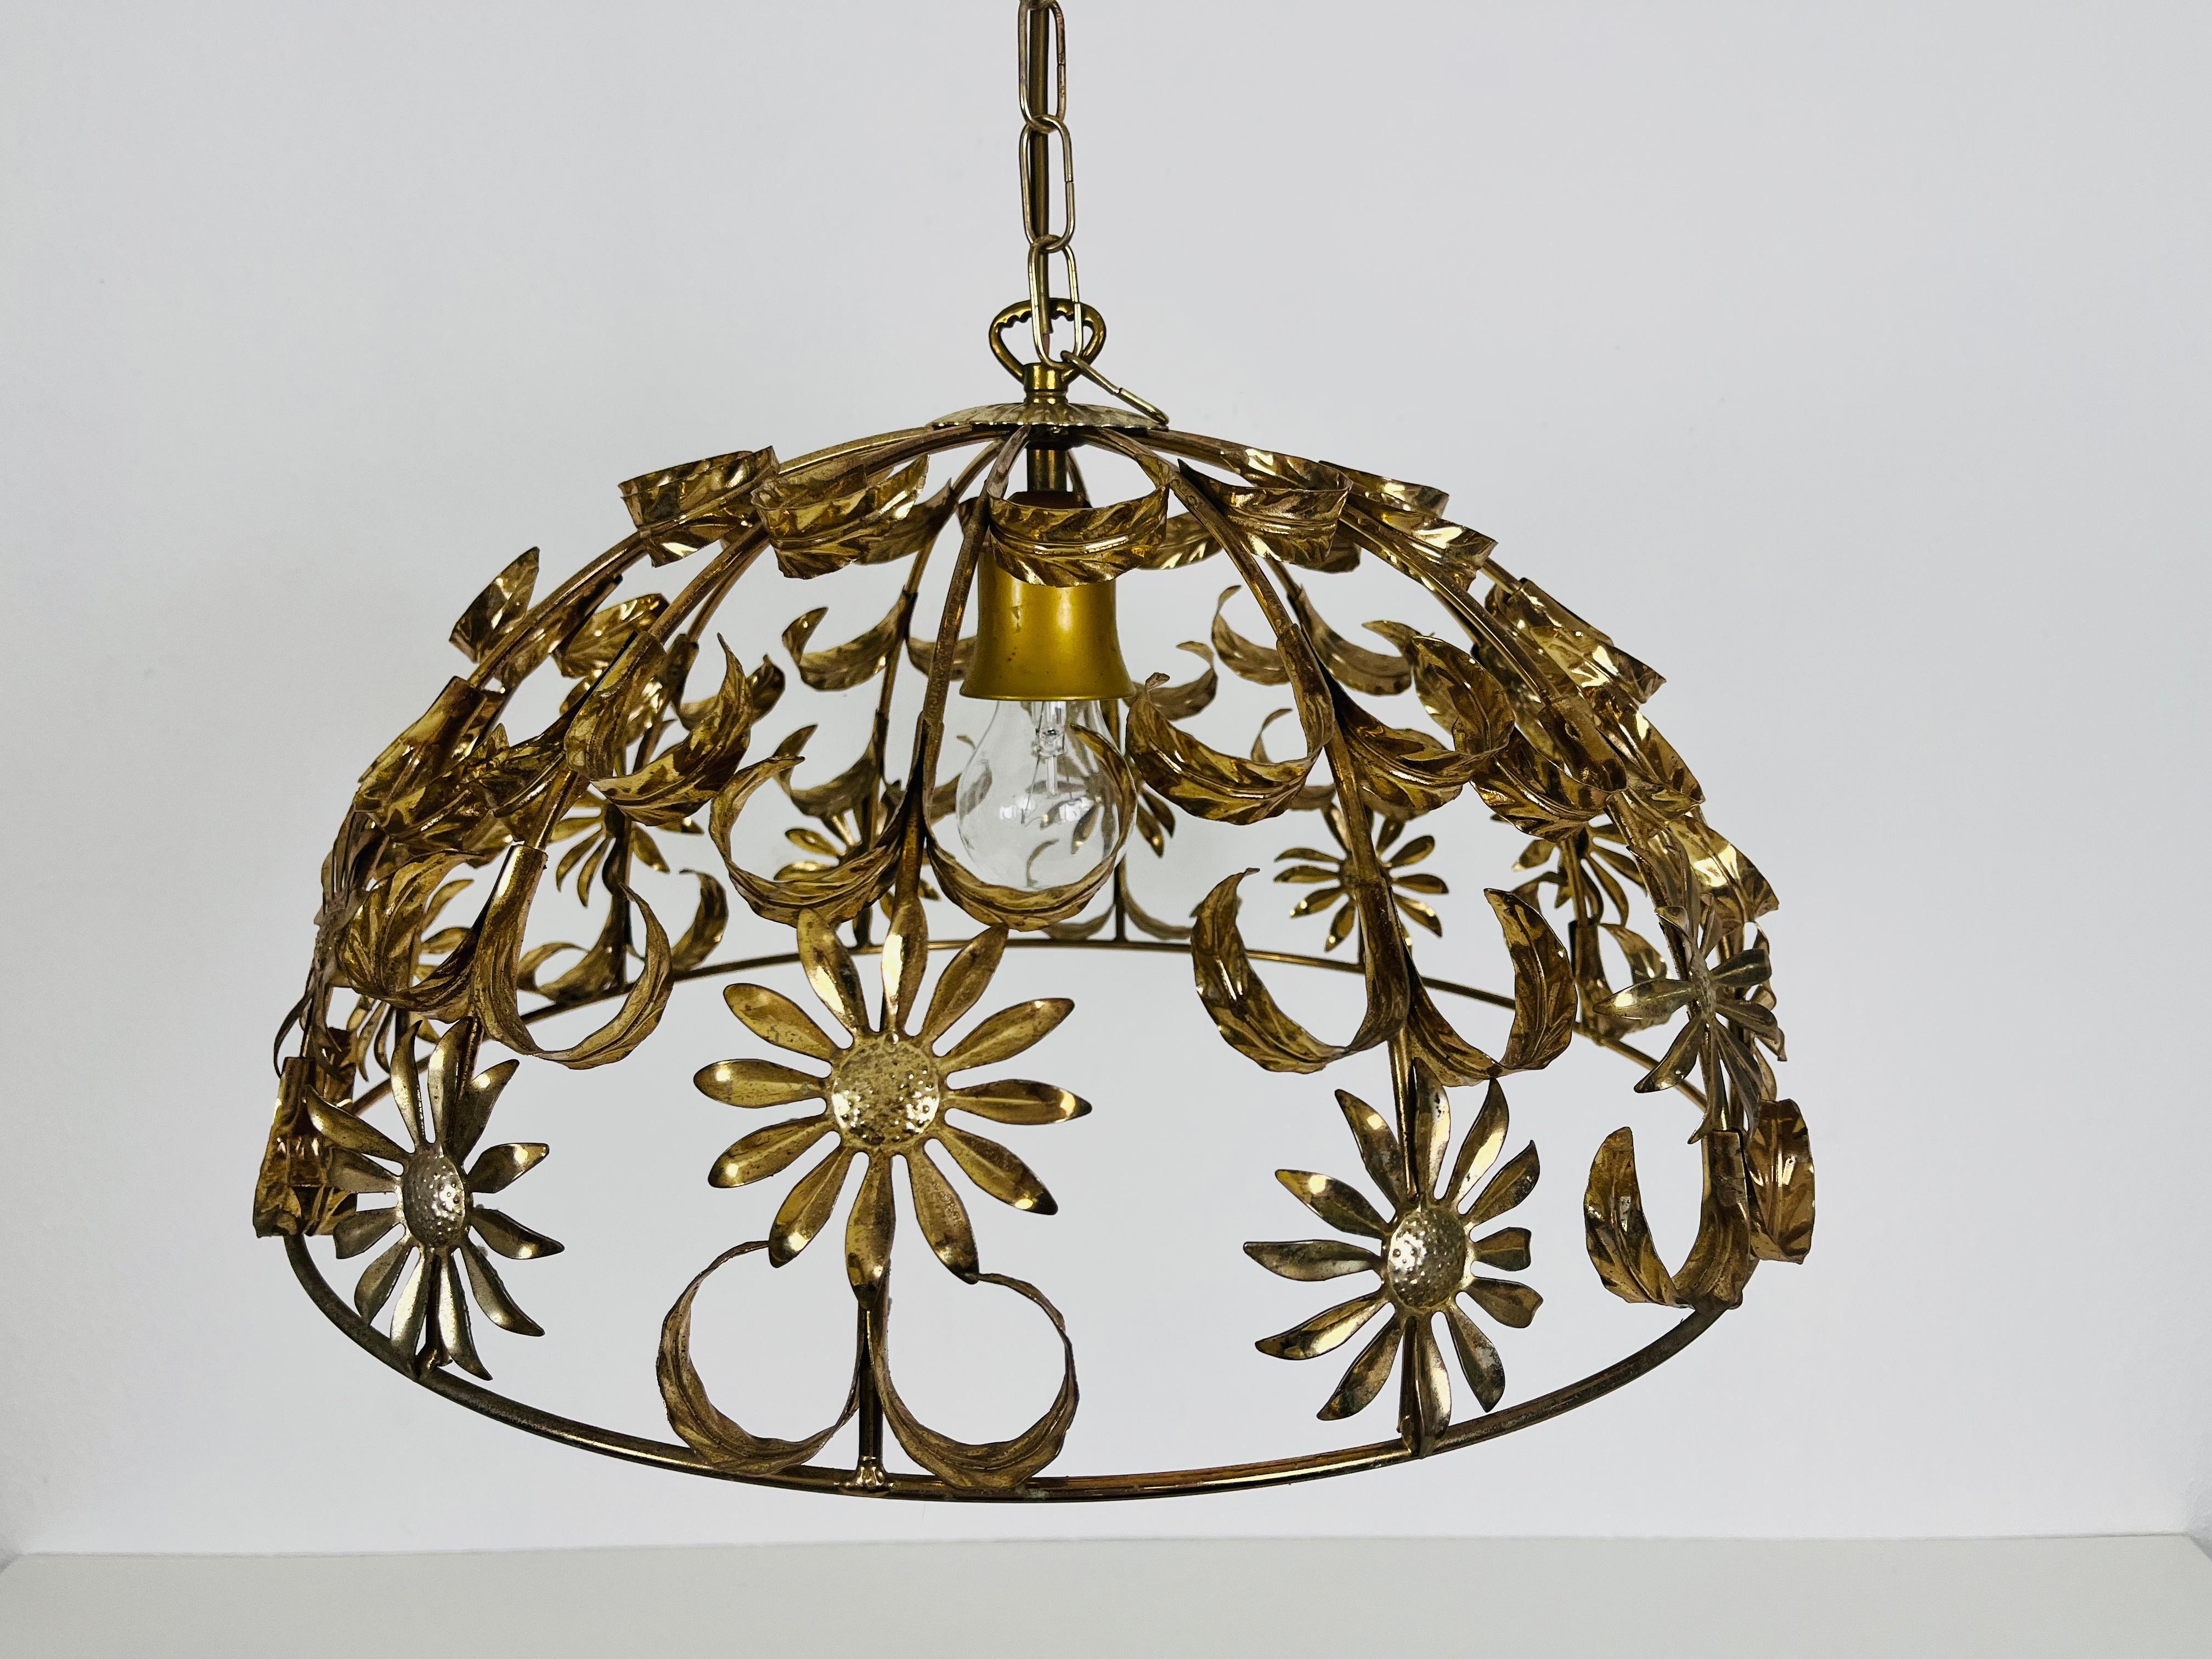 German Florentine Flower Shape Pendant Lamp Attributed to Banci Firenze, 1970s For Sale